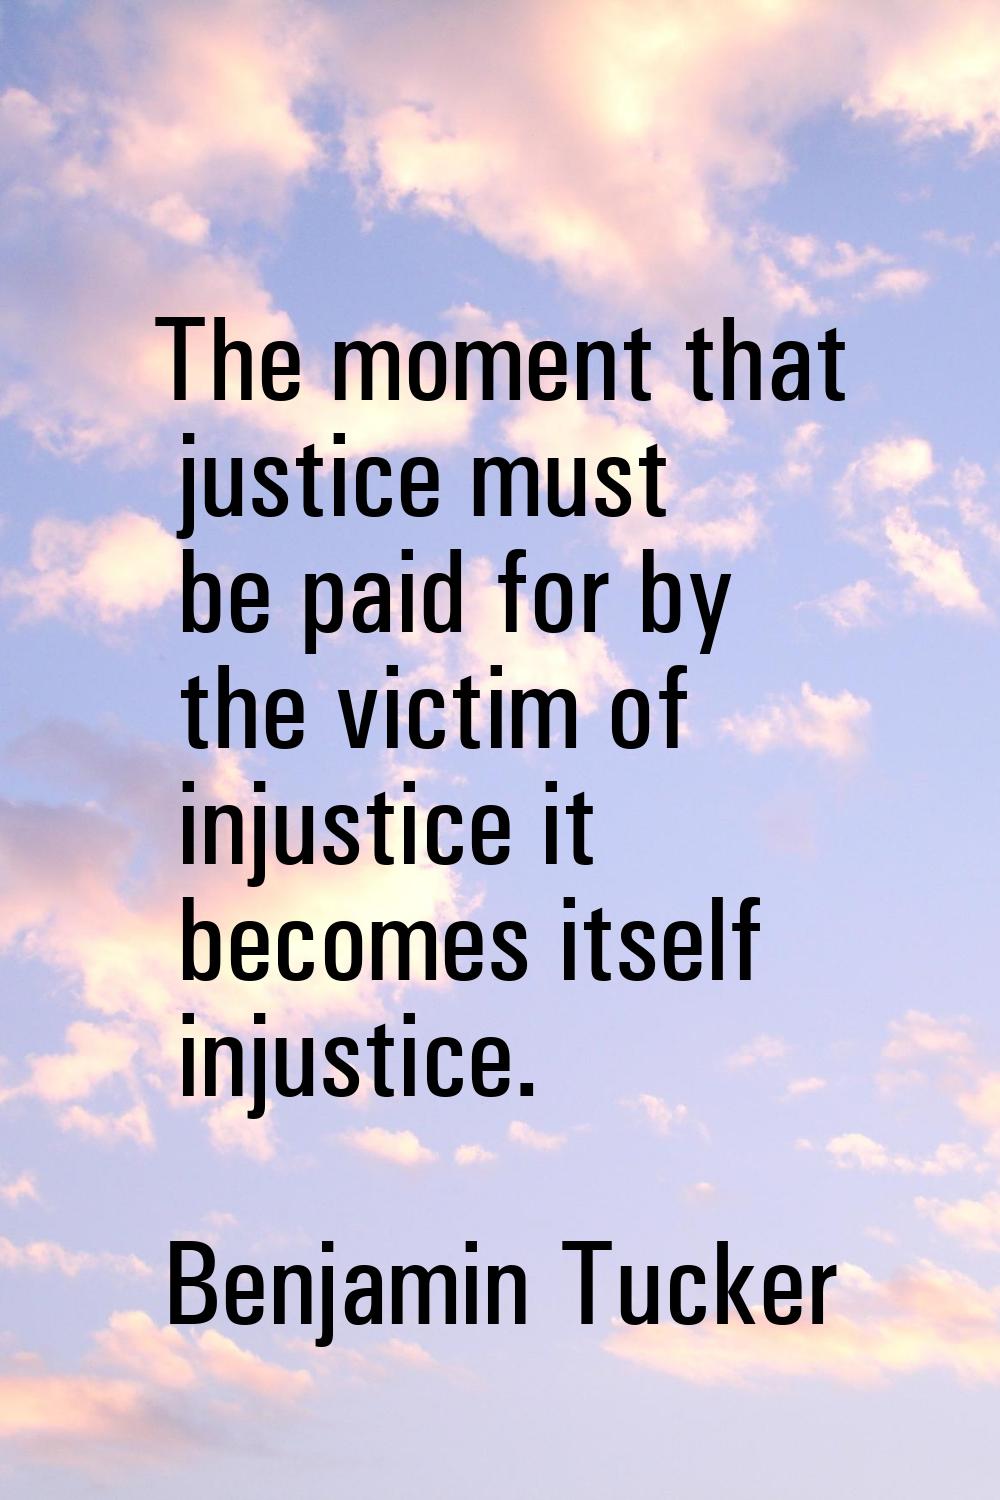 The moment that justice must be paid for by the victim of injustice it becomes itself injustice.